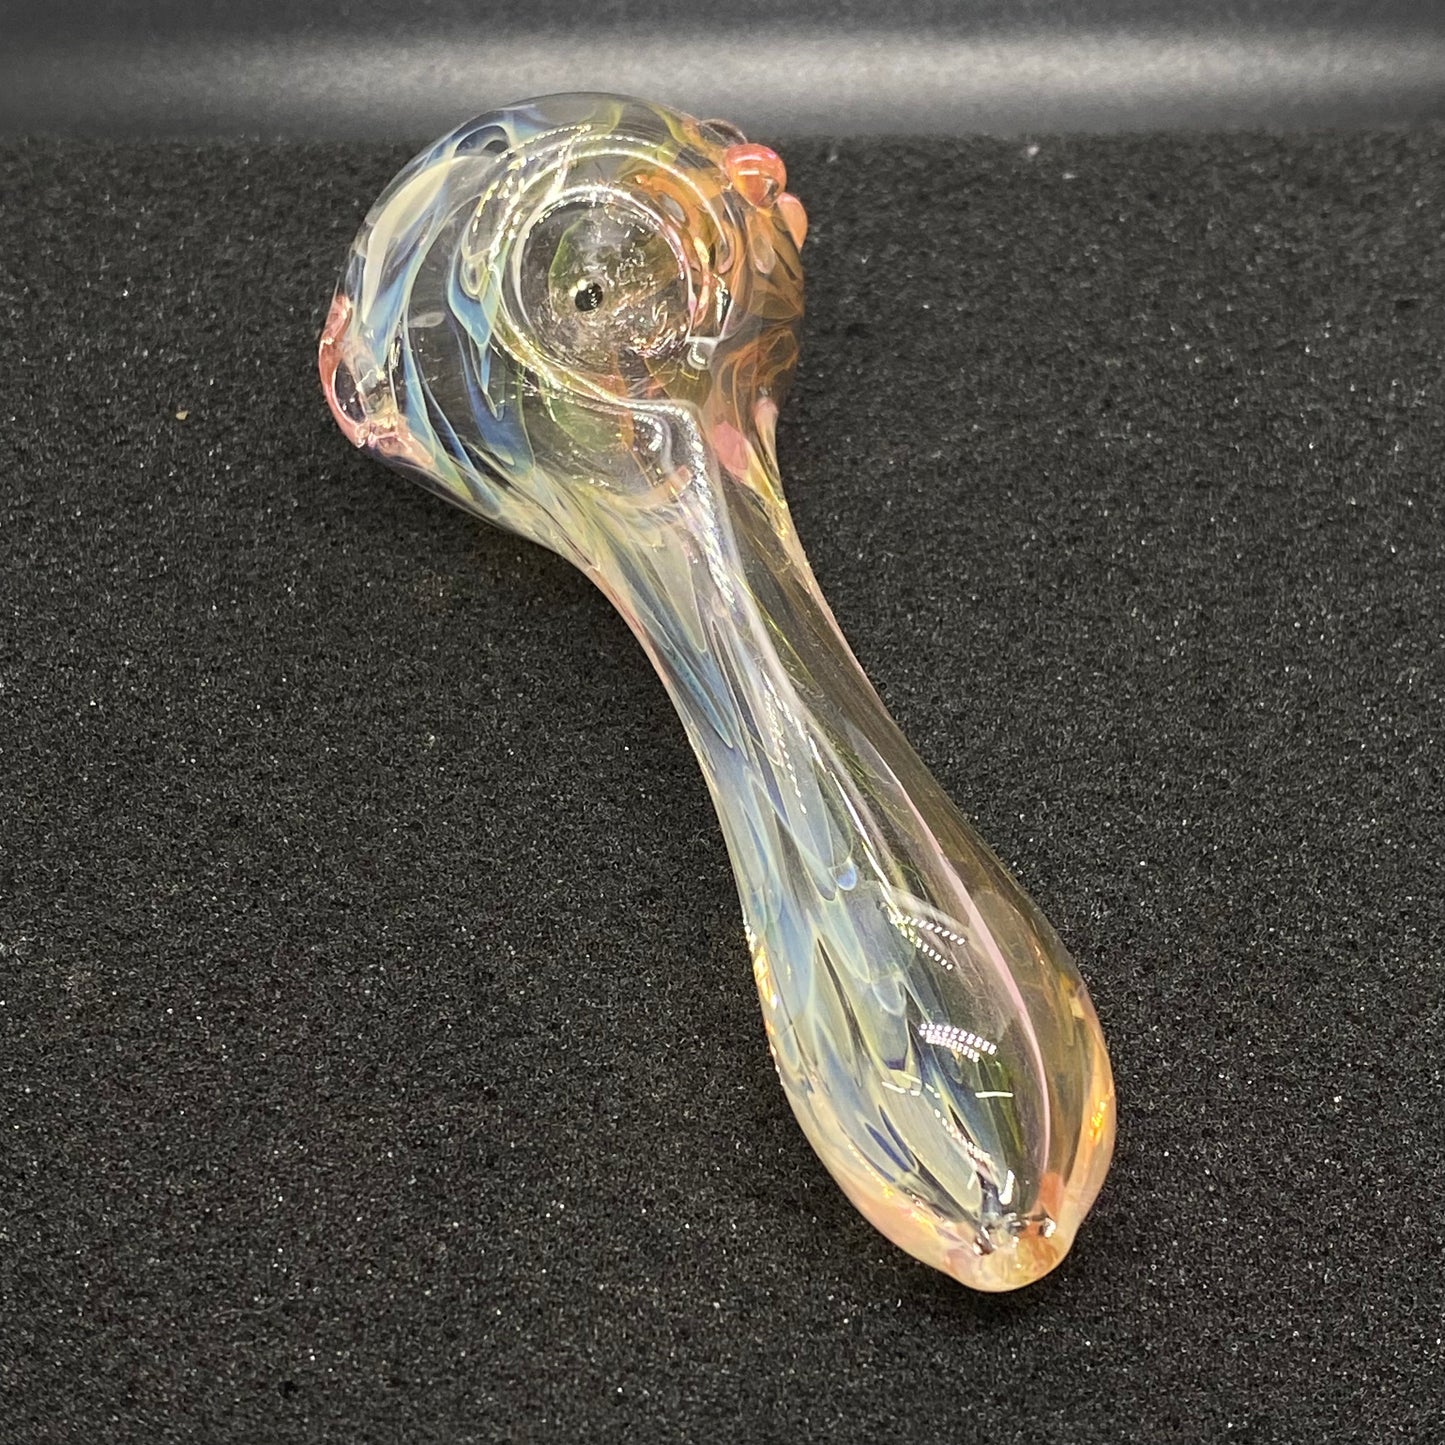 Nephilim Glass - Fumed Hand Pipe